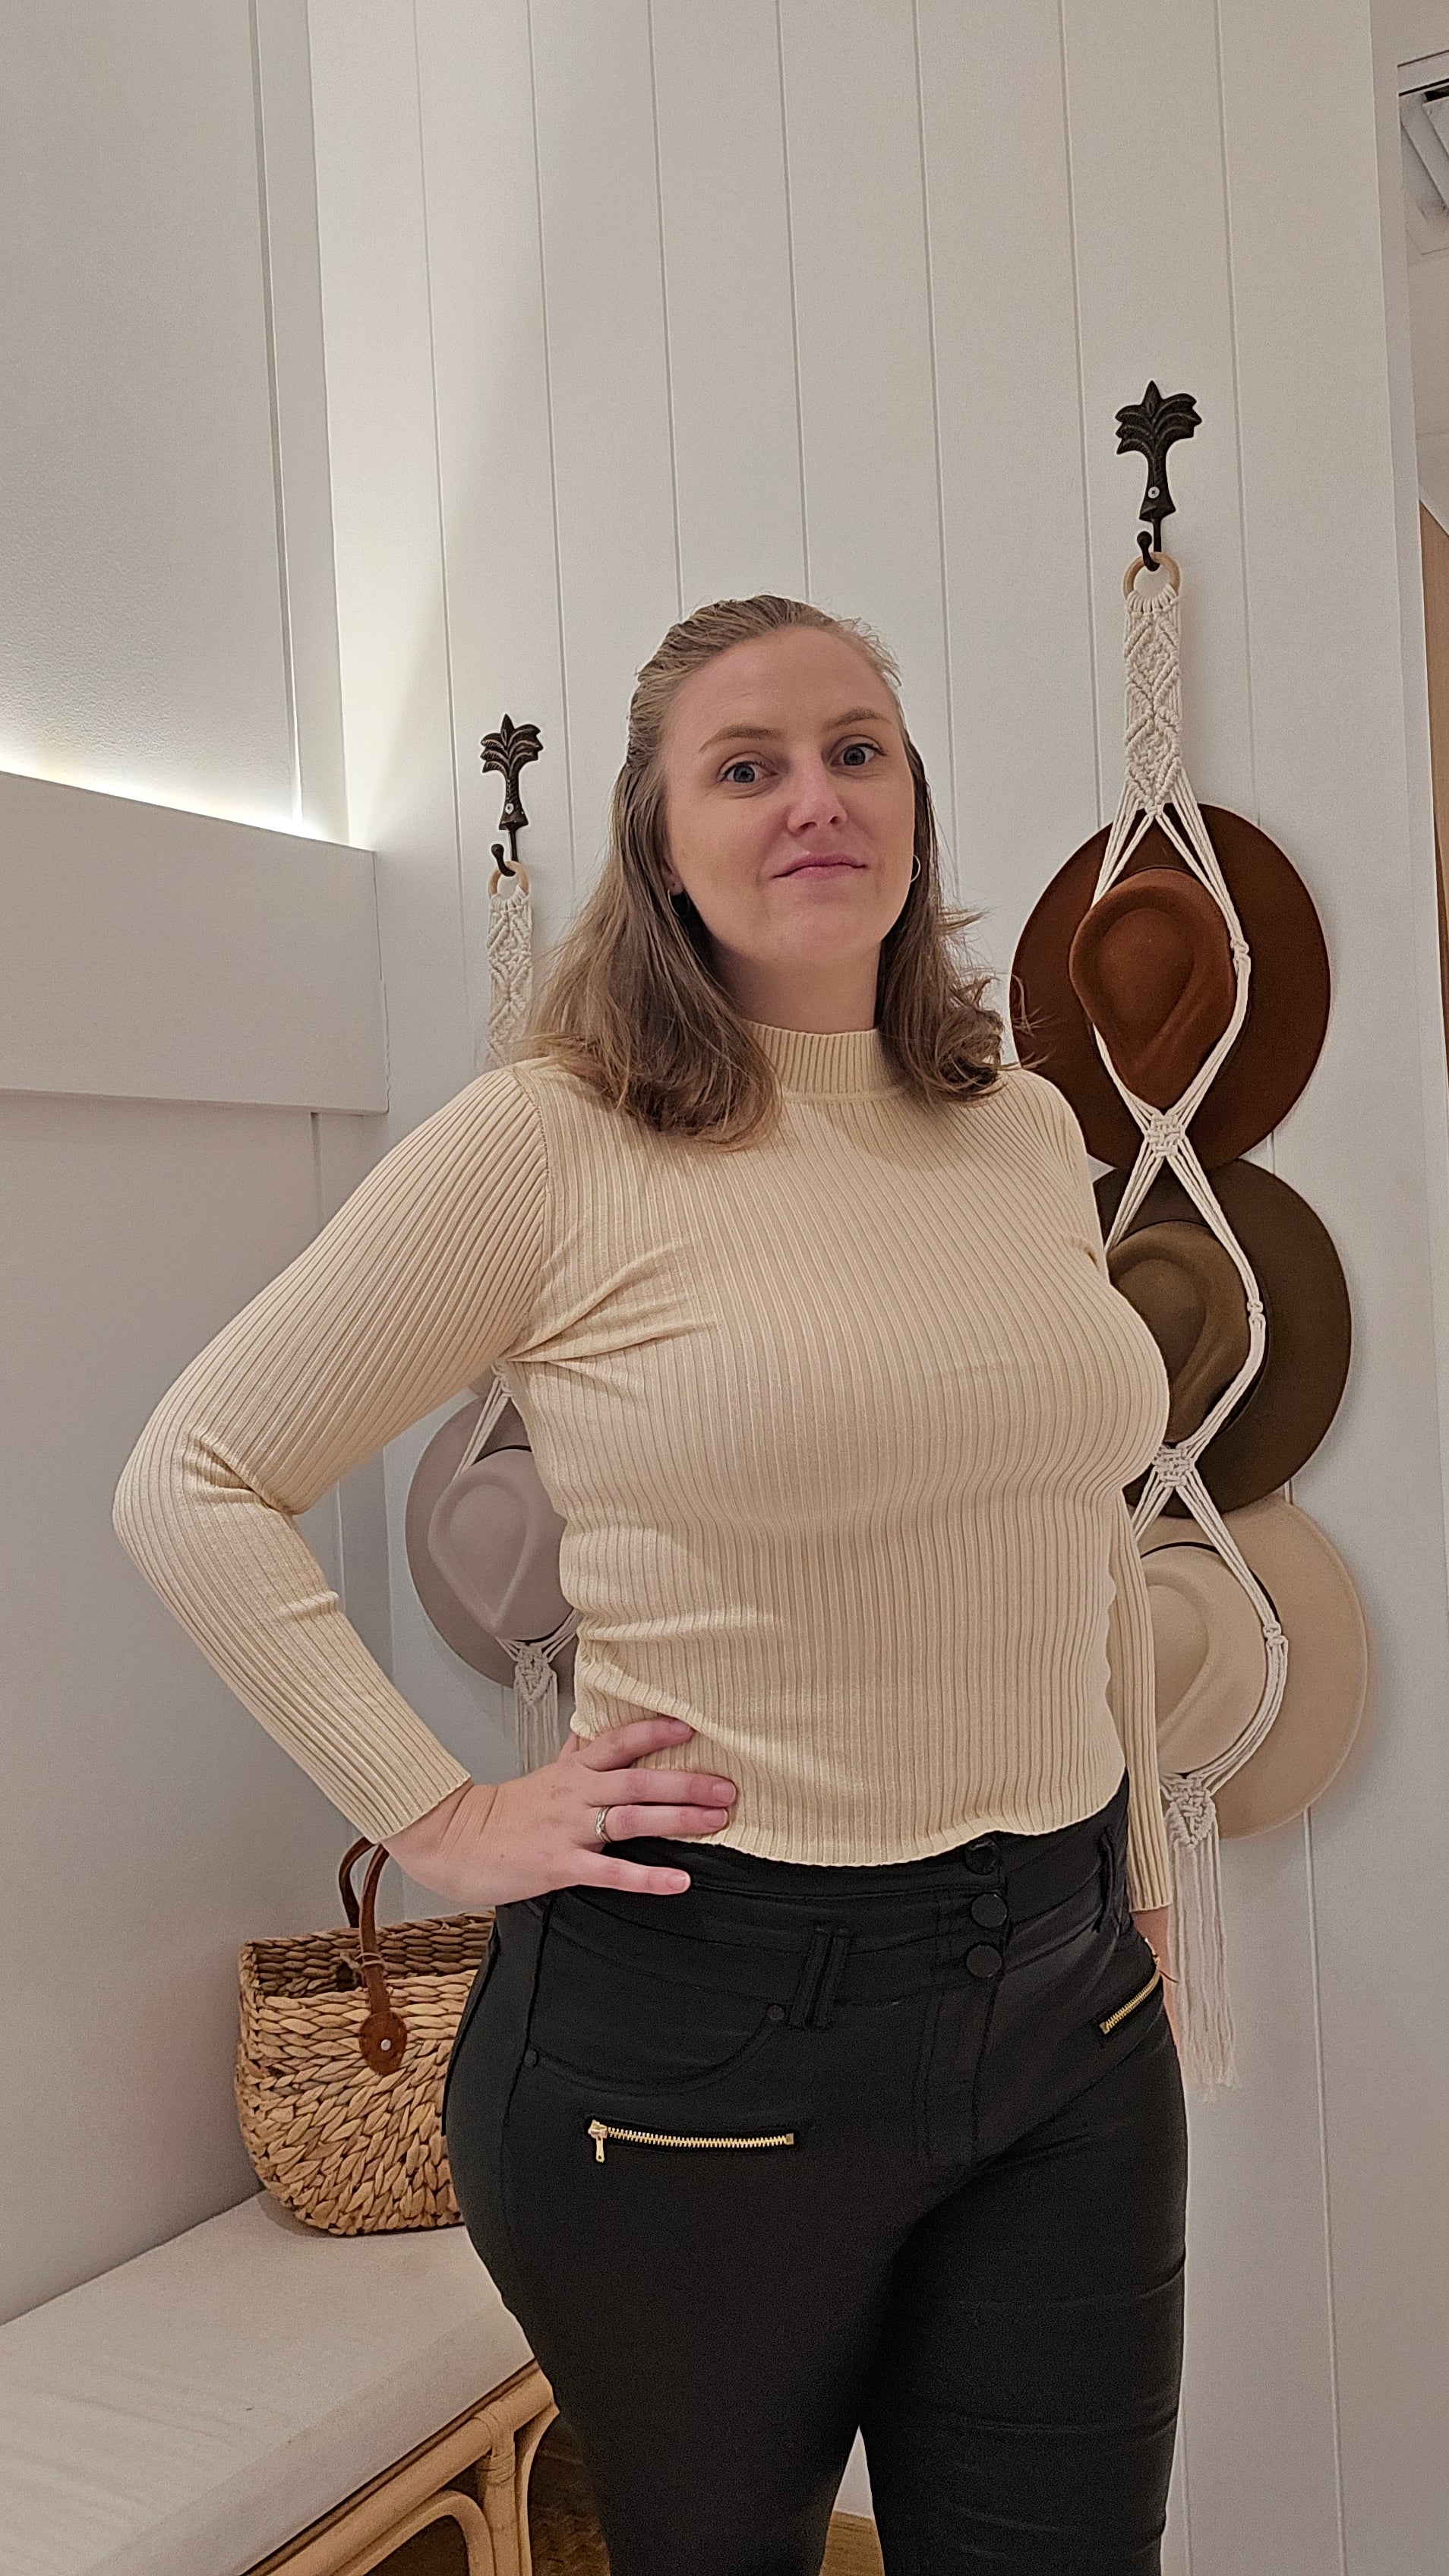 Introducing our Erin Ribbed Skivvy in Cream! Made with a stretchy knit fabric, this skivvy not only keeps you warm but also allows for flexibility. The long sleeves and high skivvy neck provide additional coverage during colder days. Upgrade your wardrobe with this versatile and comfortable piece!